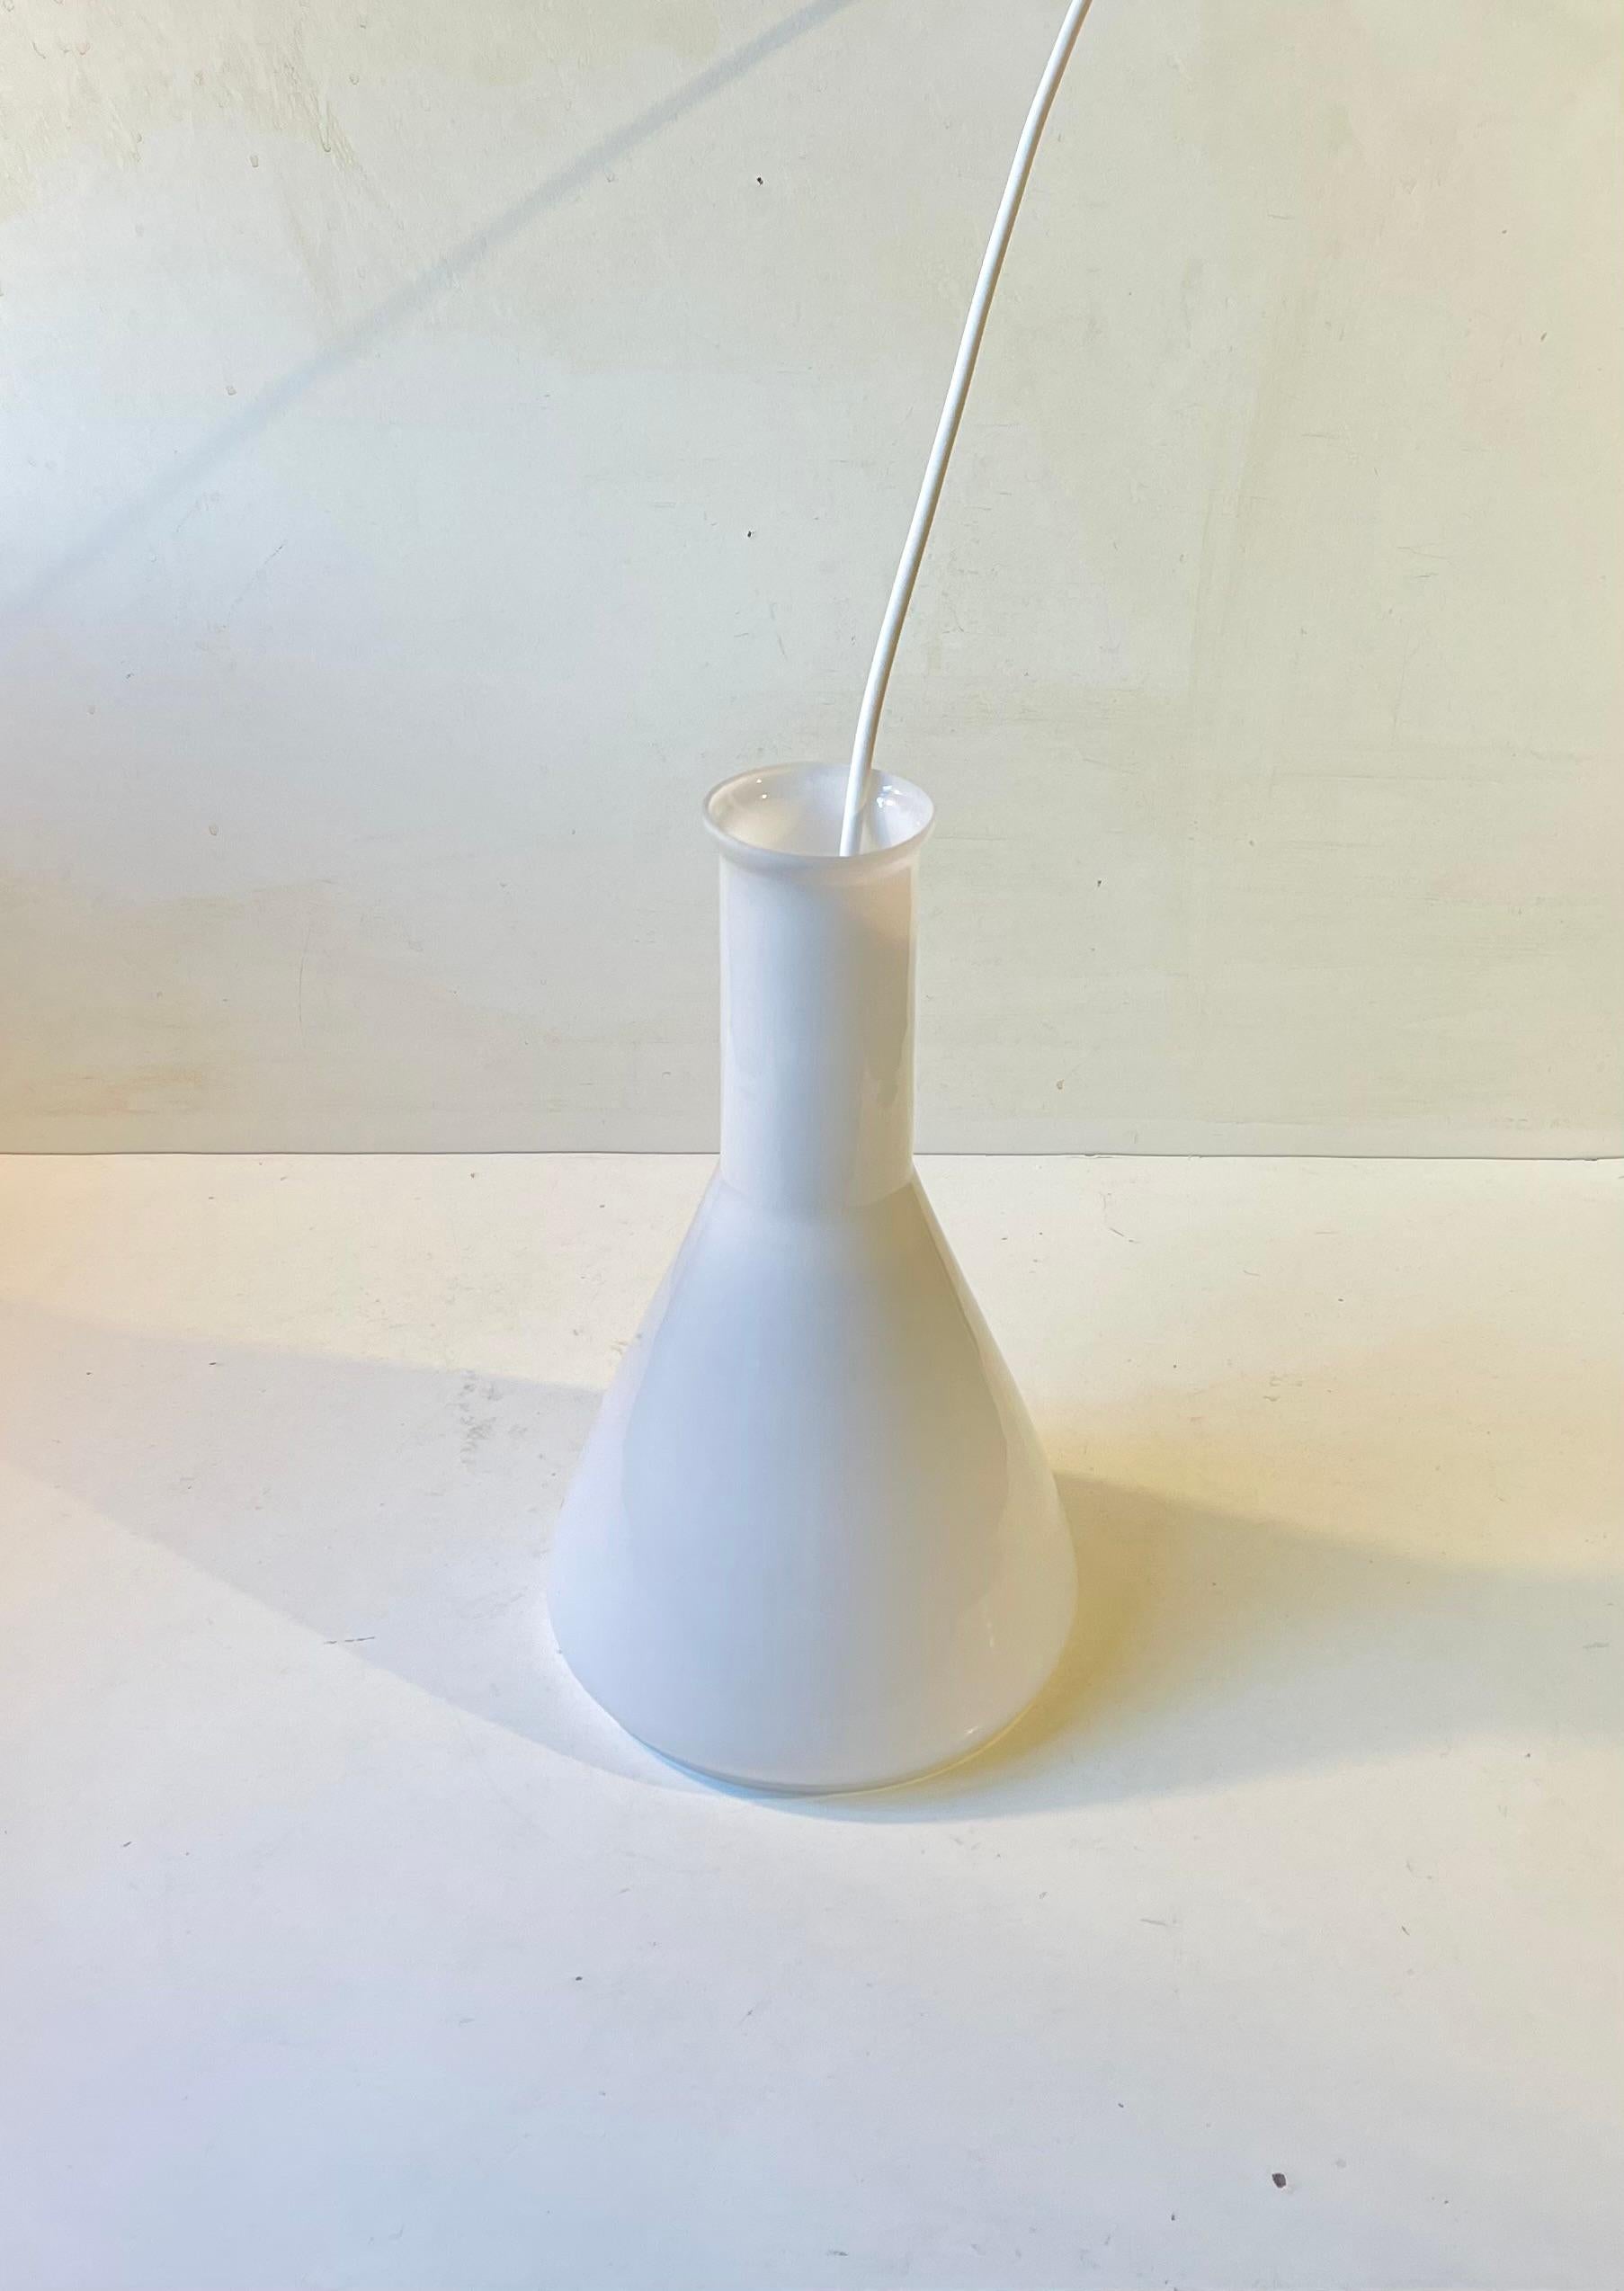 Organically shaped pendant lamp in white opaline glass. Possibly made by Holmegaard in Denmark during the 1960s based upon a design by Jacob E. Bang. Measurements: H: 30 cm, Diameter: 18 cm. It comes installed with 3 meters new white cord.